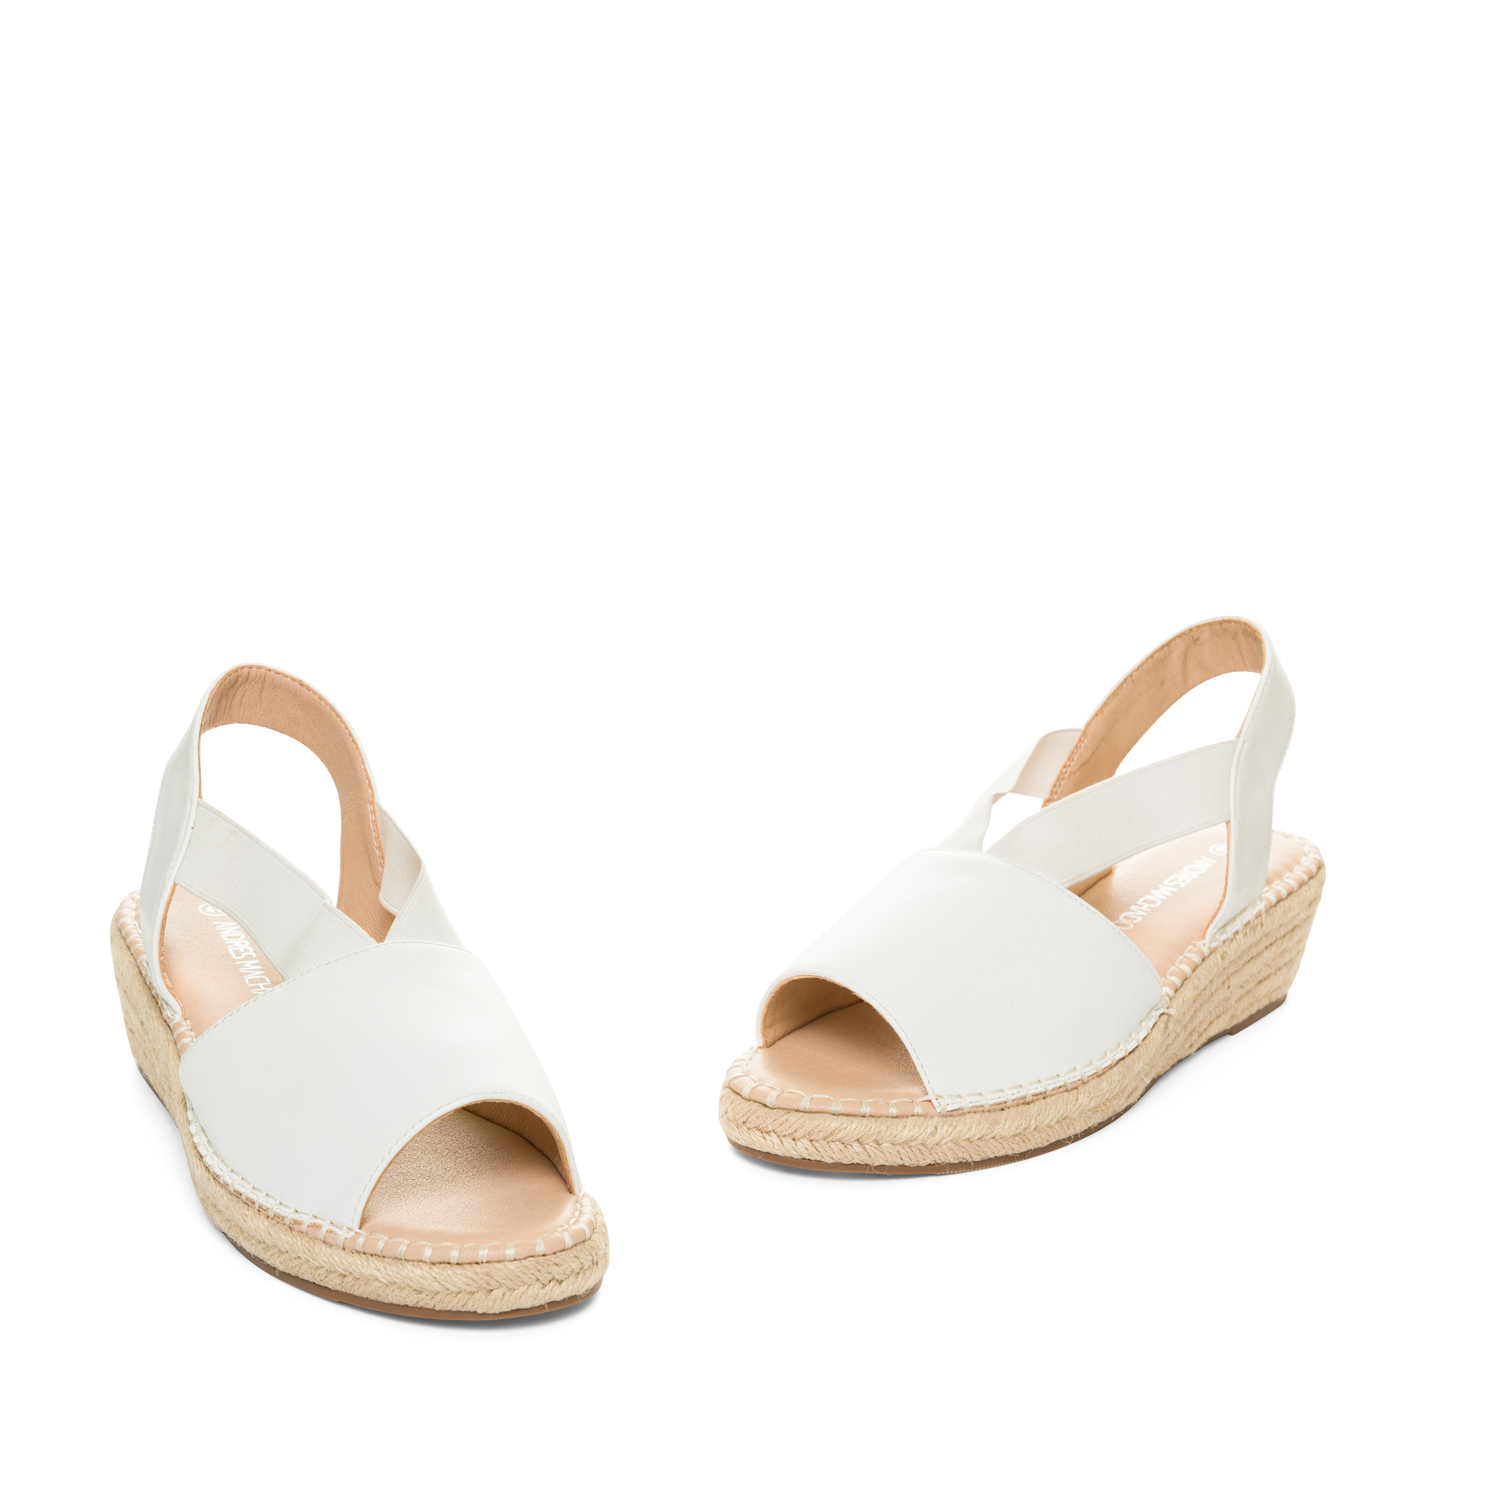 White faux leather sandals with jute wedge 